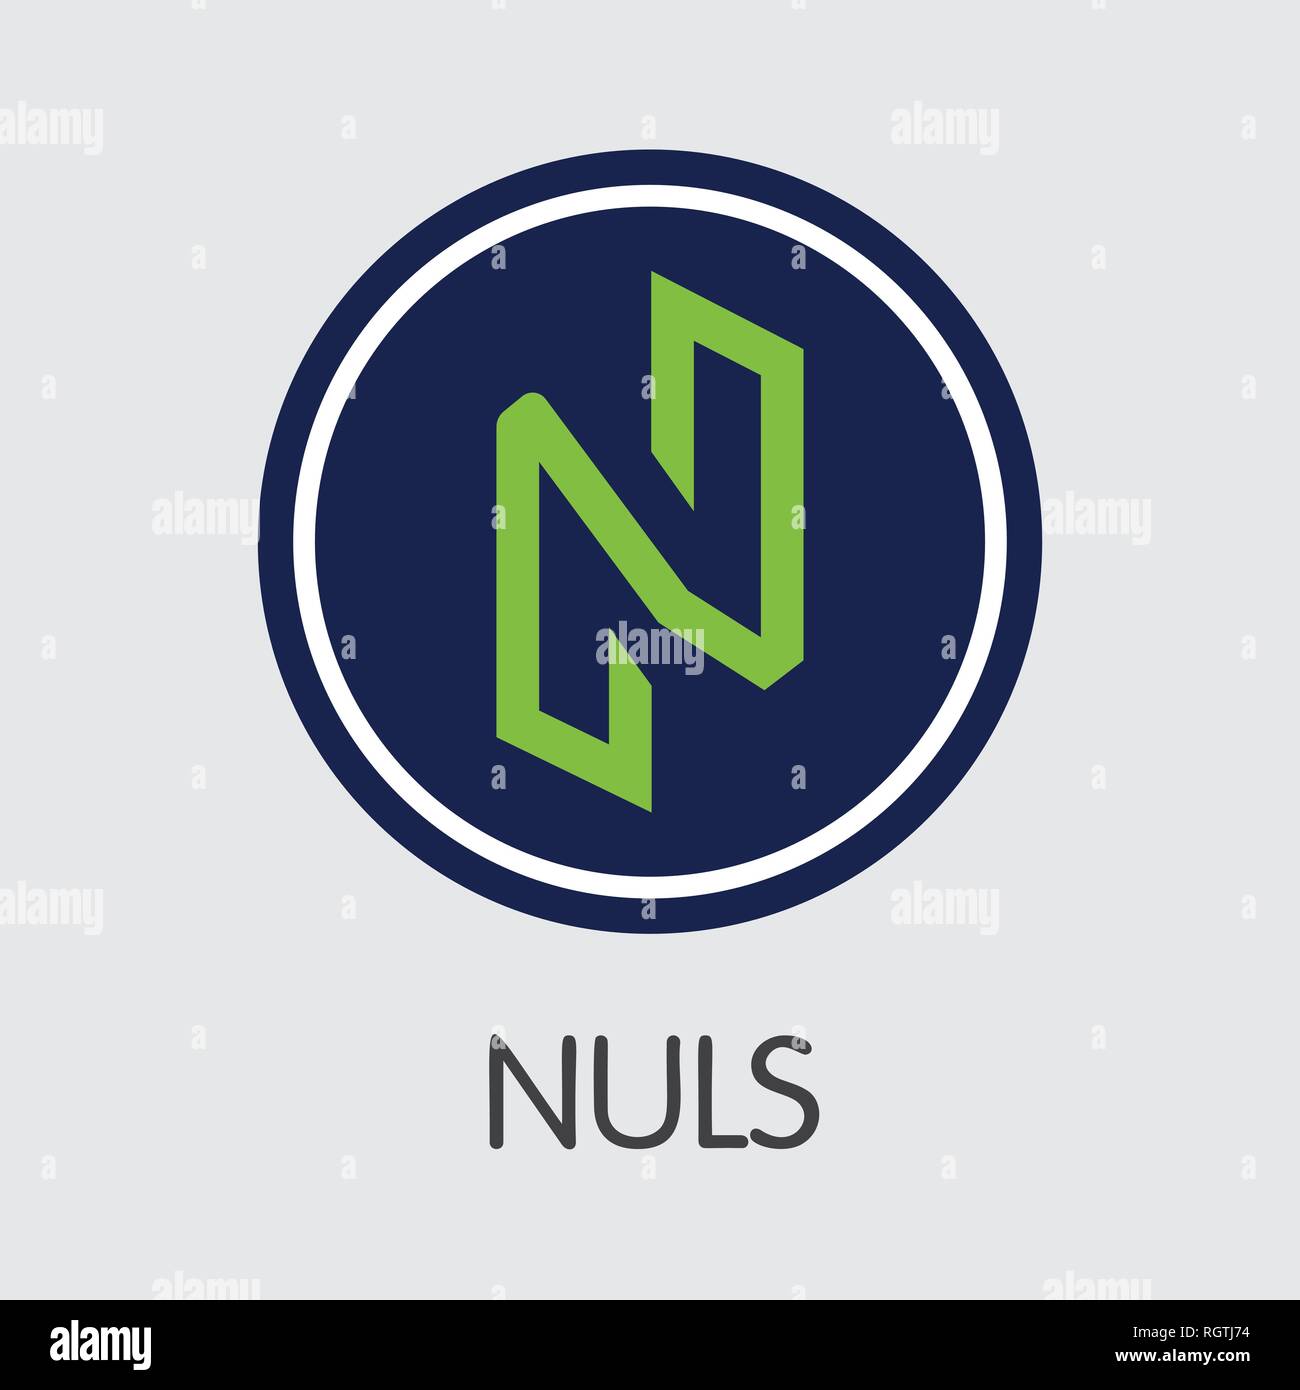 Nuls Stock Photos & Nuls Stock Images - Alamy